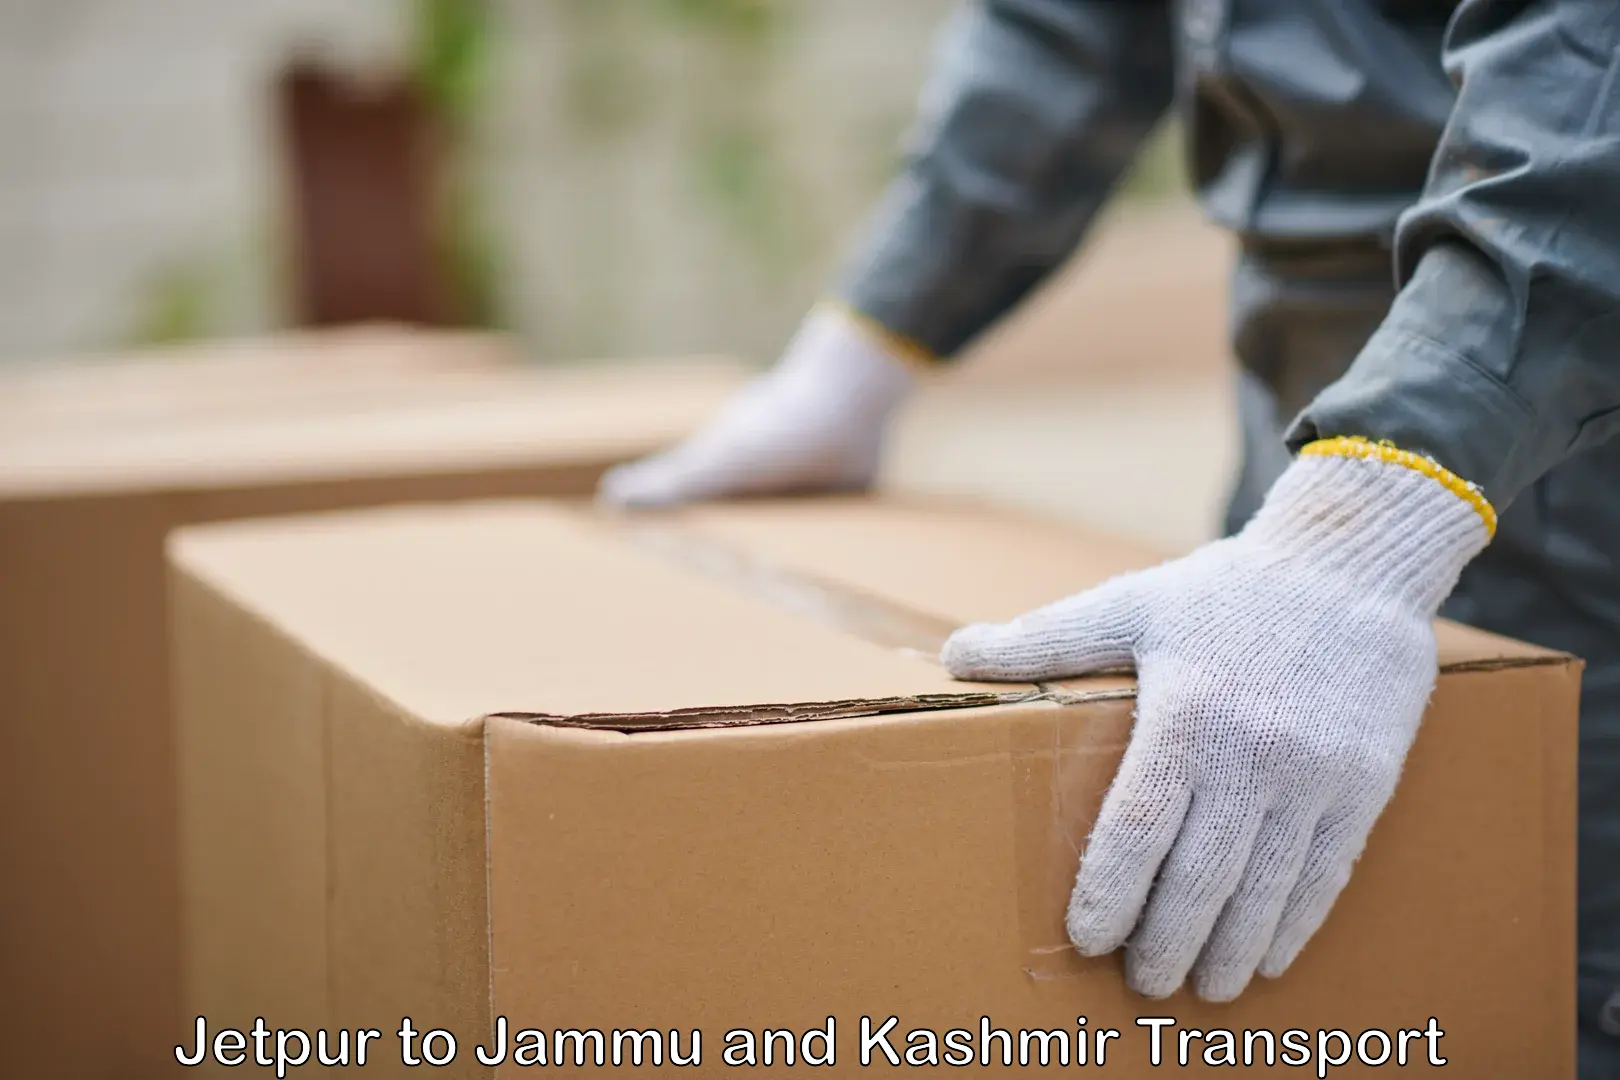 Container transport service Jetpur to Jammu and Kashmir